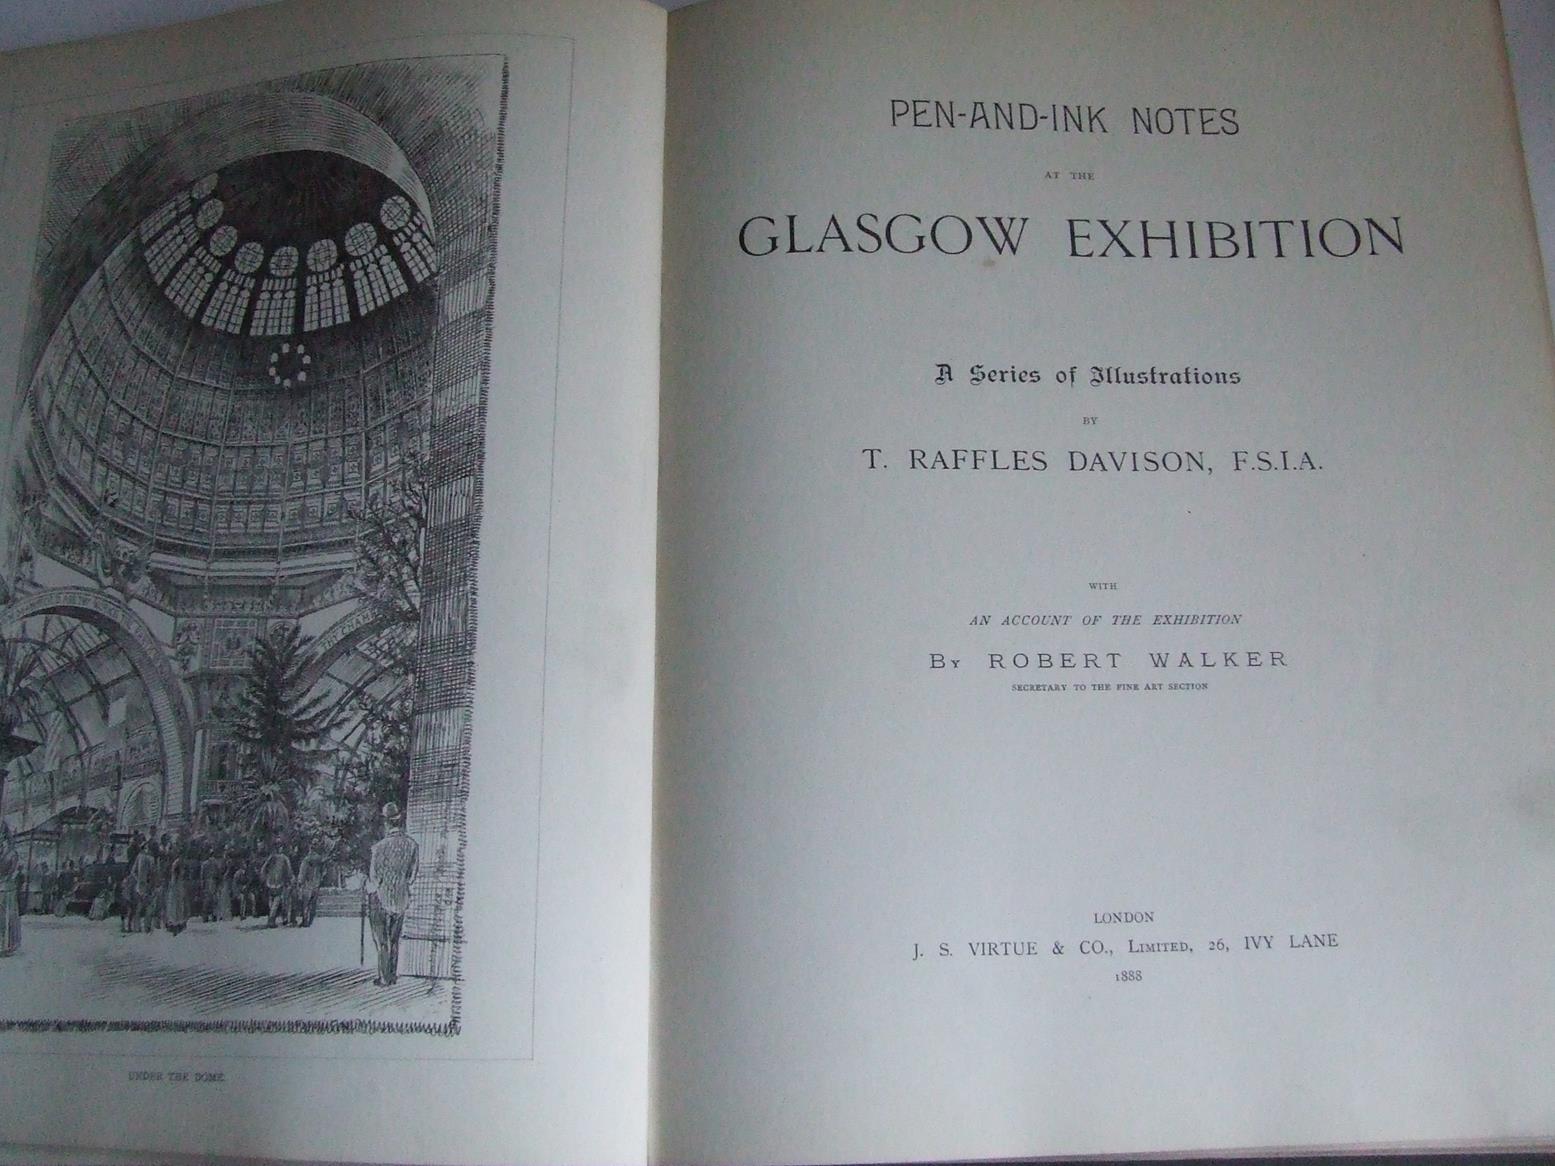 Pen-and-Ink Notes at the Glasgow Exhibition